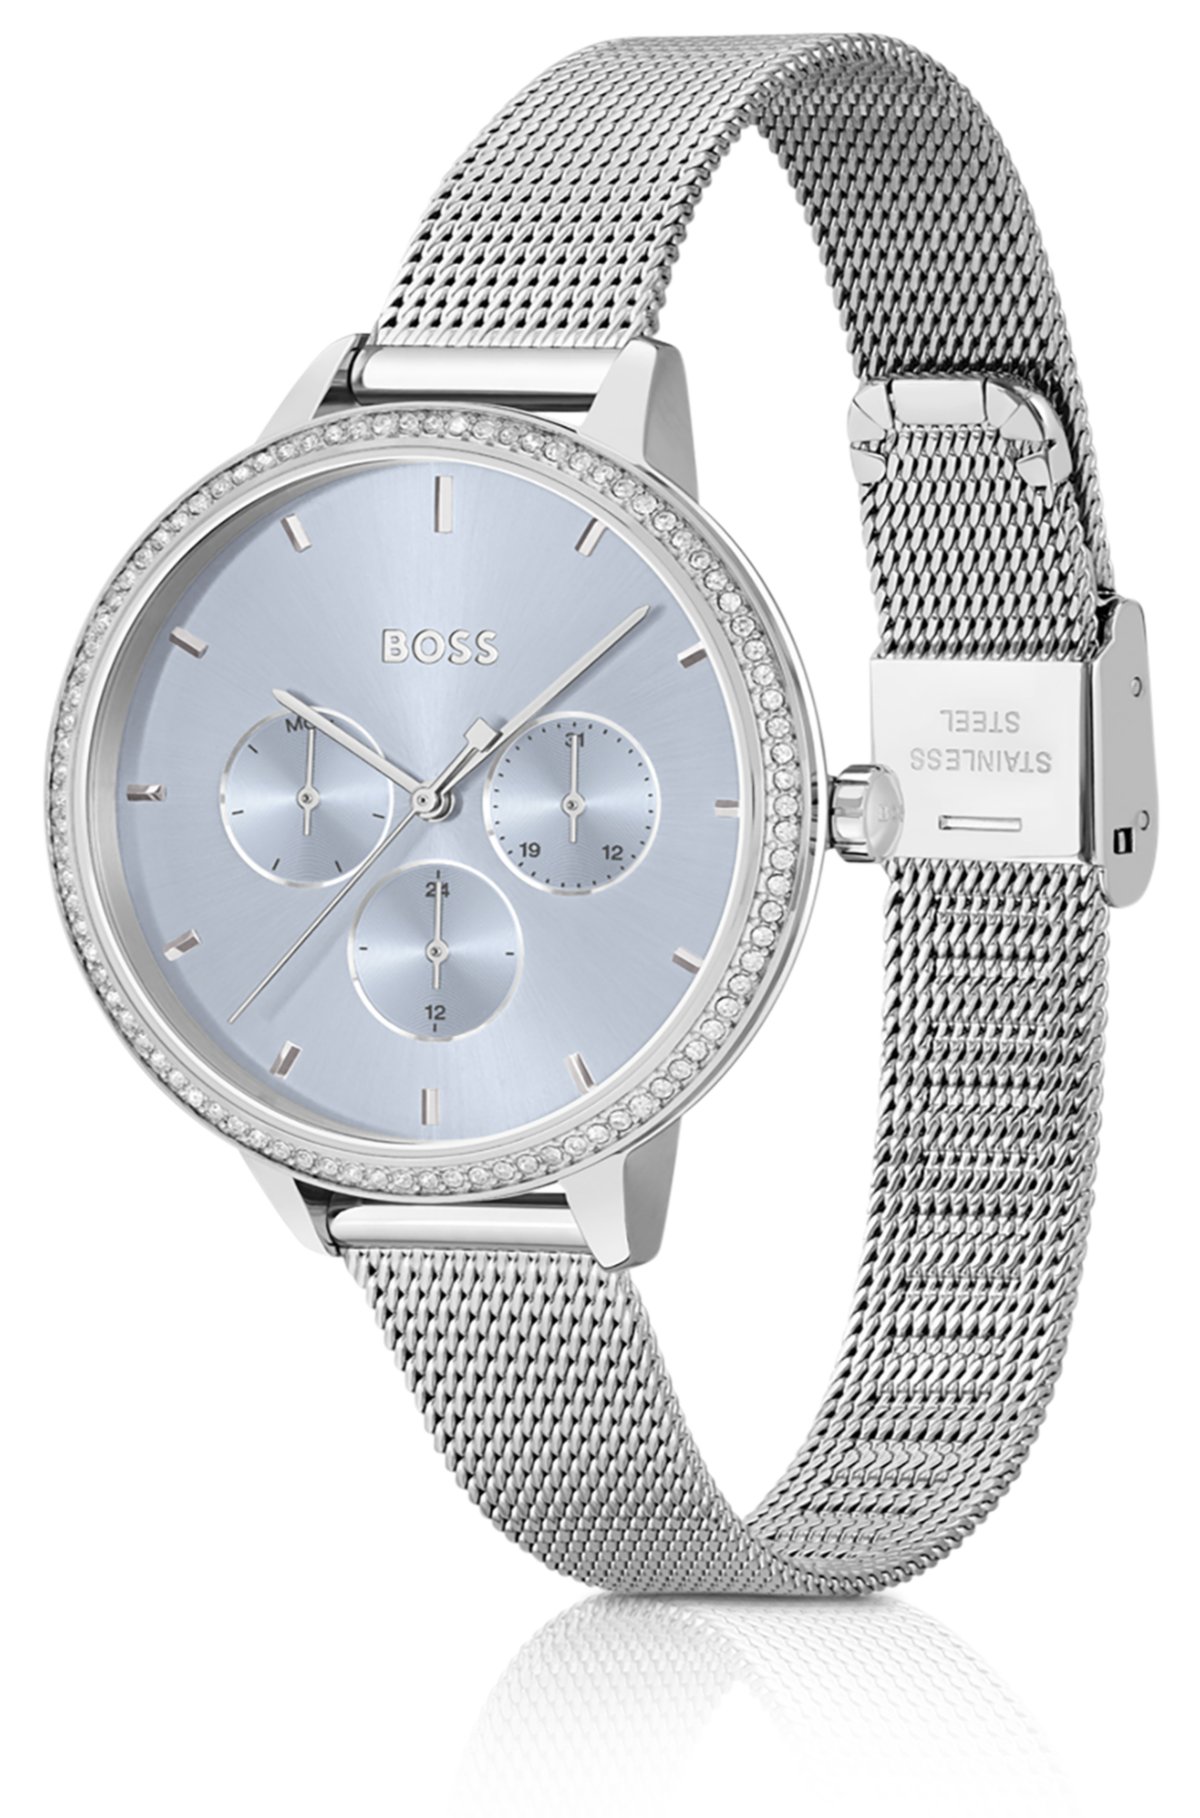 Blue-dial watch with crystal-set bezel, Silver